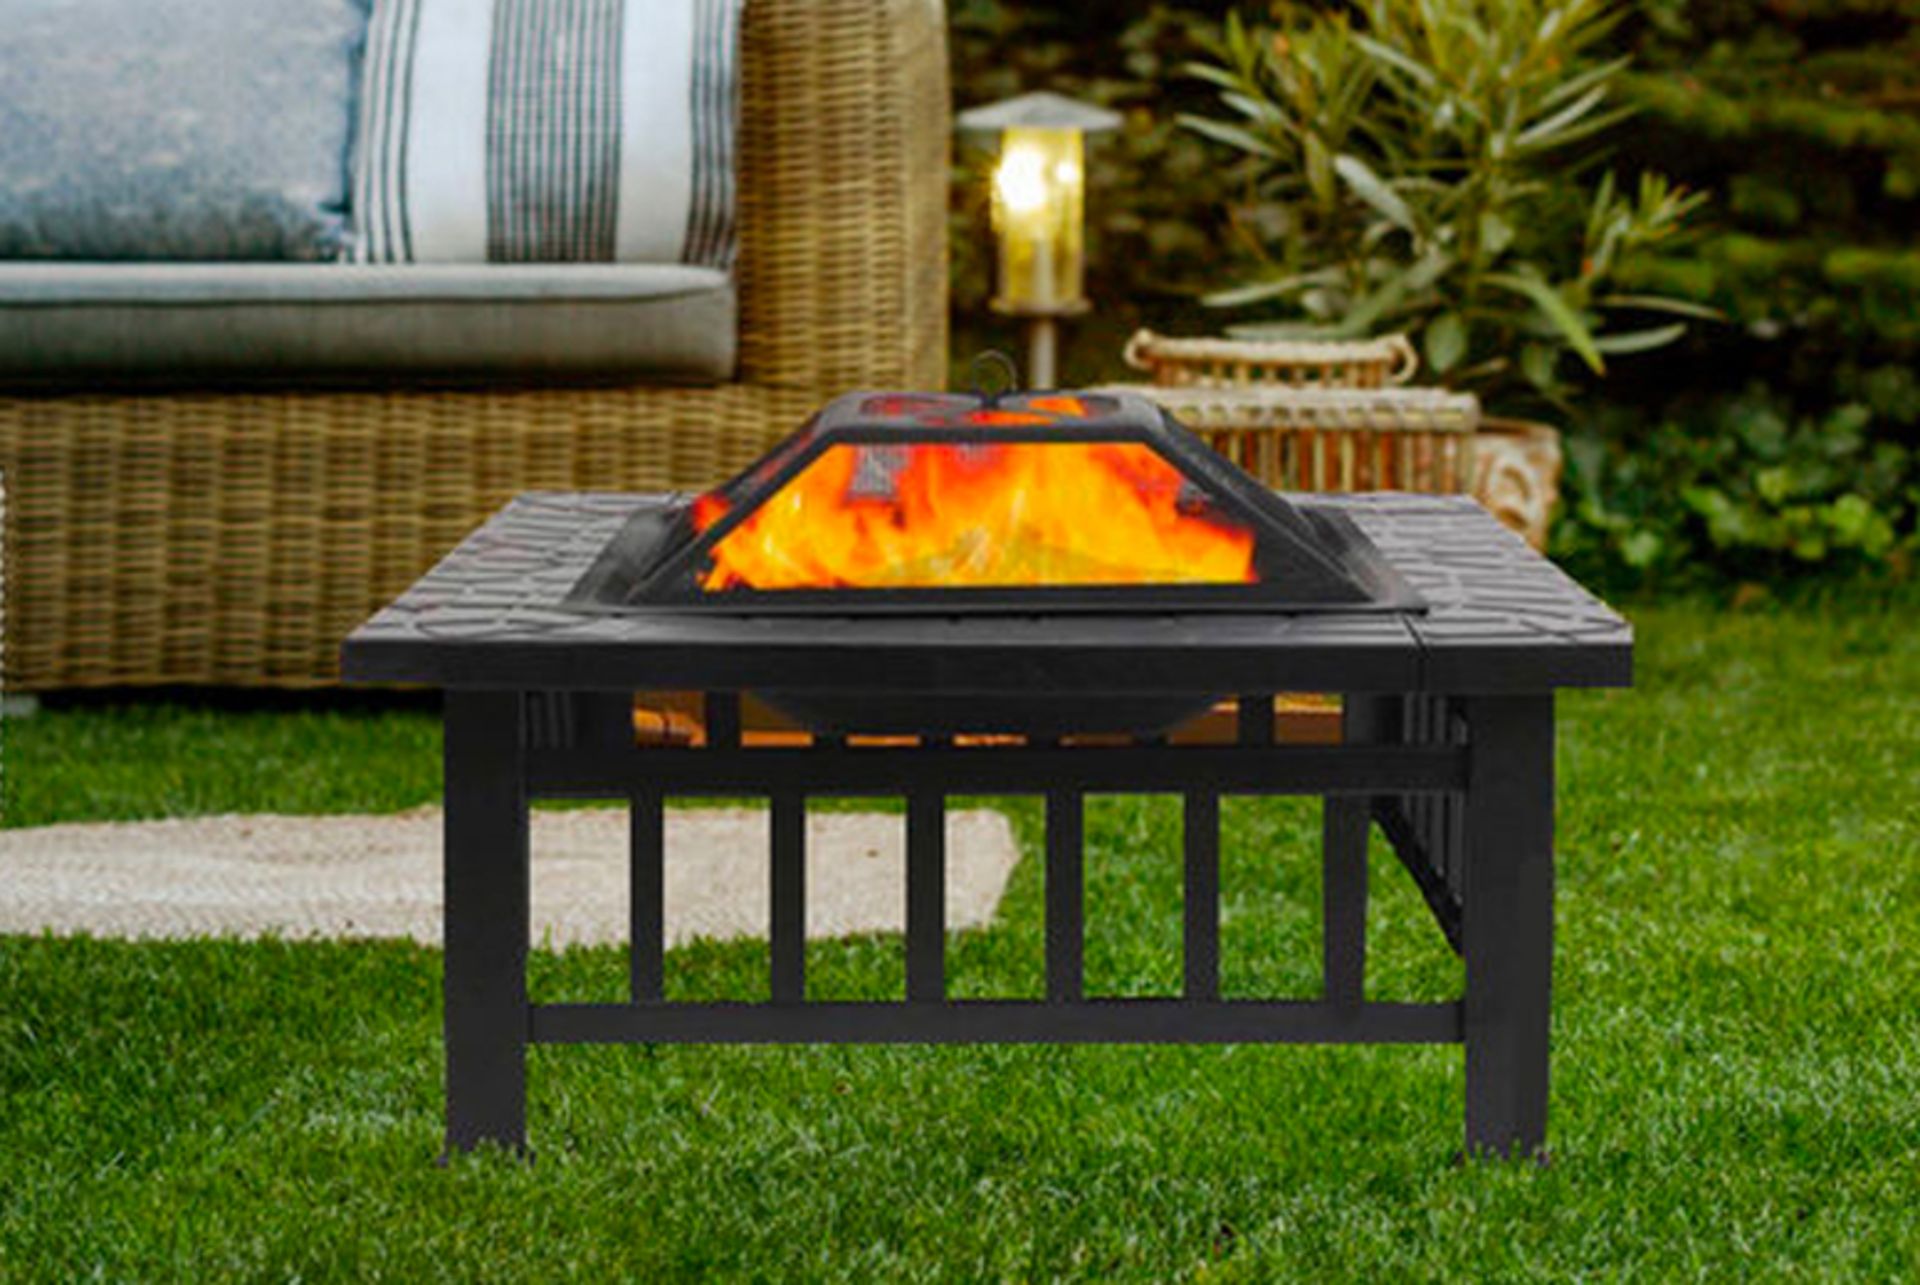 FREE DELIVERY - JOBLOT OF 5 X 3-IN-1 LARGE SQUARE FIRE PIT